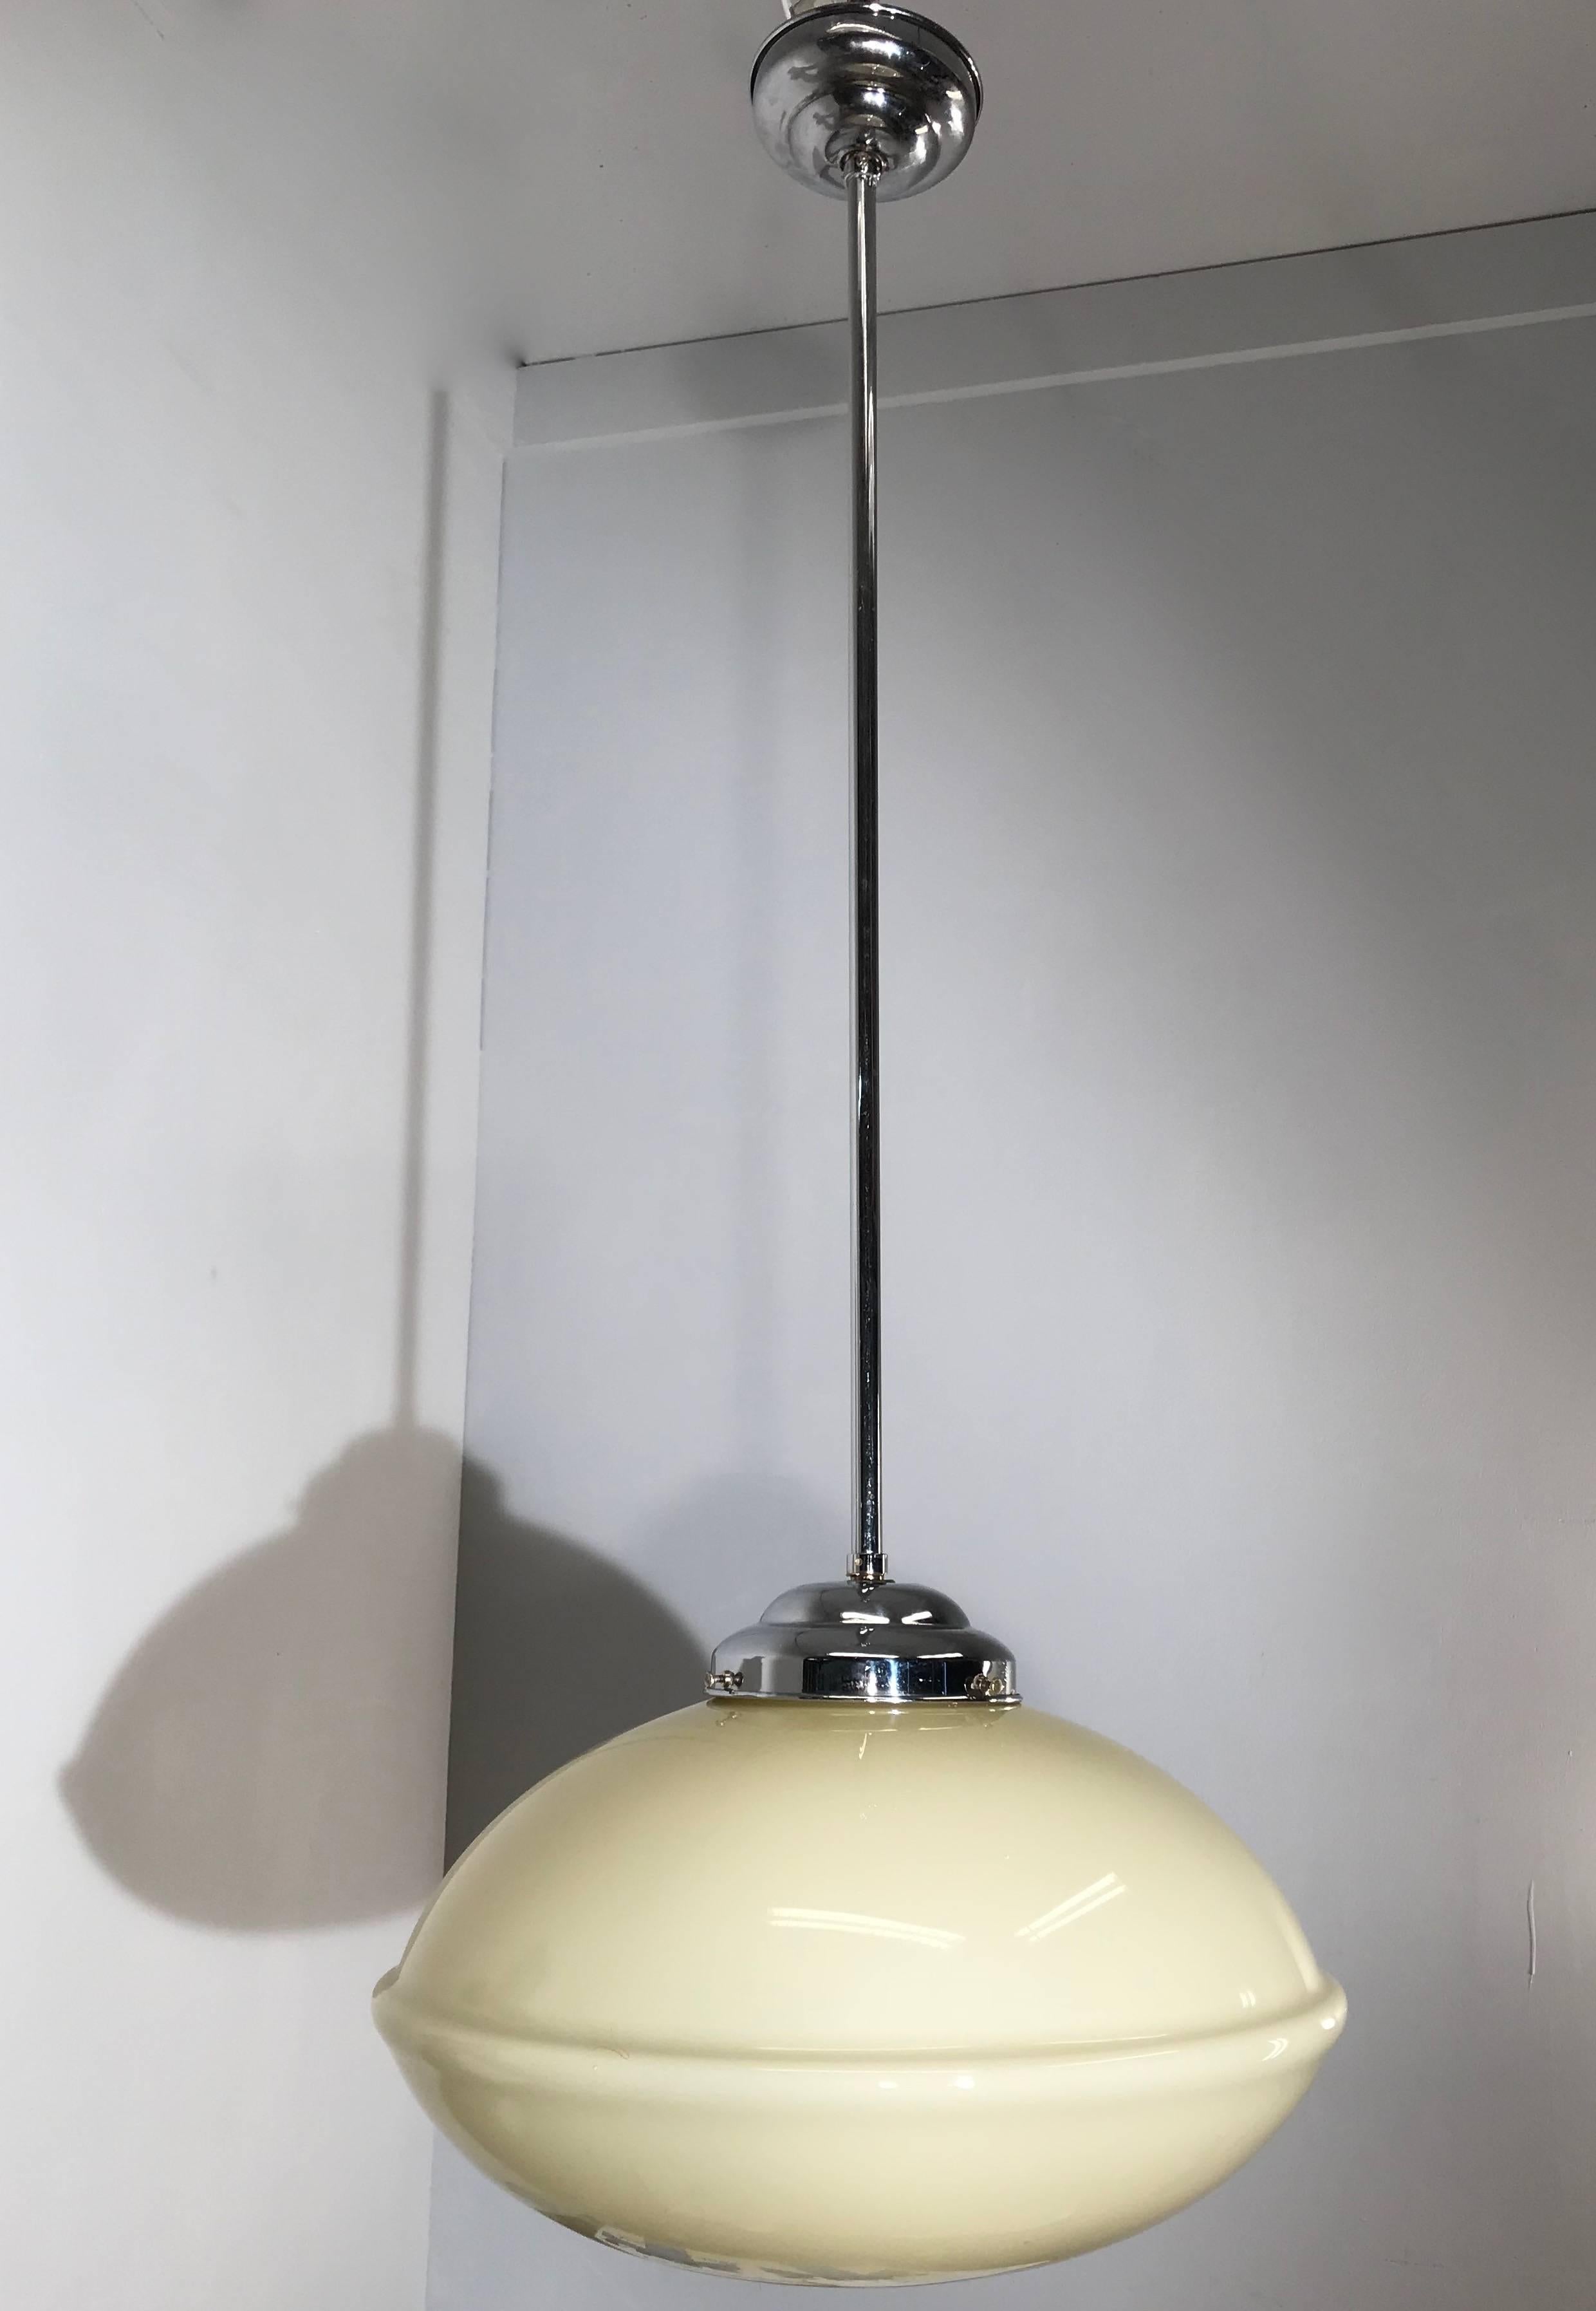 Rare shape, soft yellow Dutch Gispen style pendant.

This good size, 1930s light fixture comes with the original stem, canopy and shade holder. Because of the fantastic design and the better than average materials we attribute this rare light